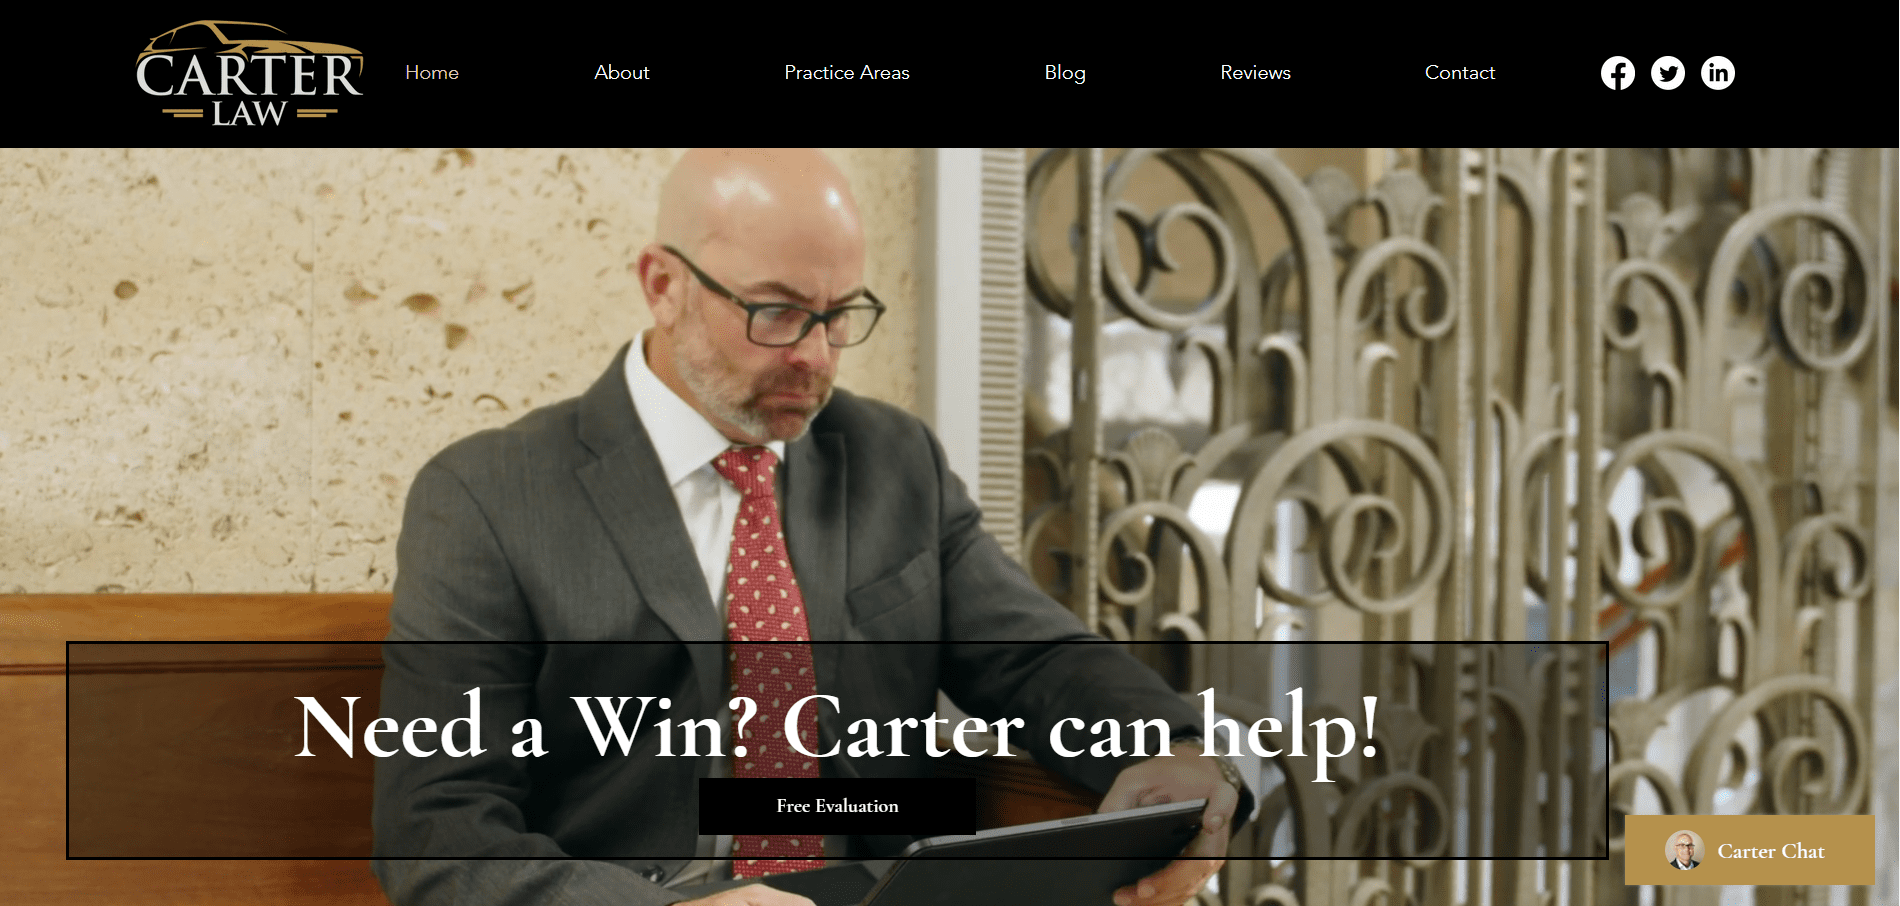 Carter Law